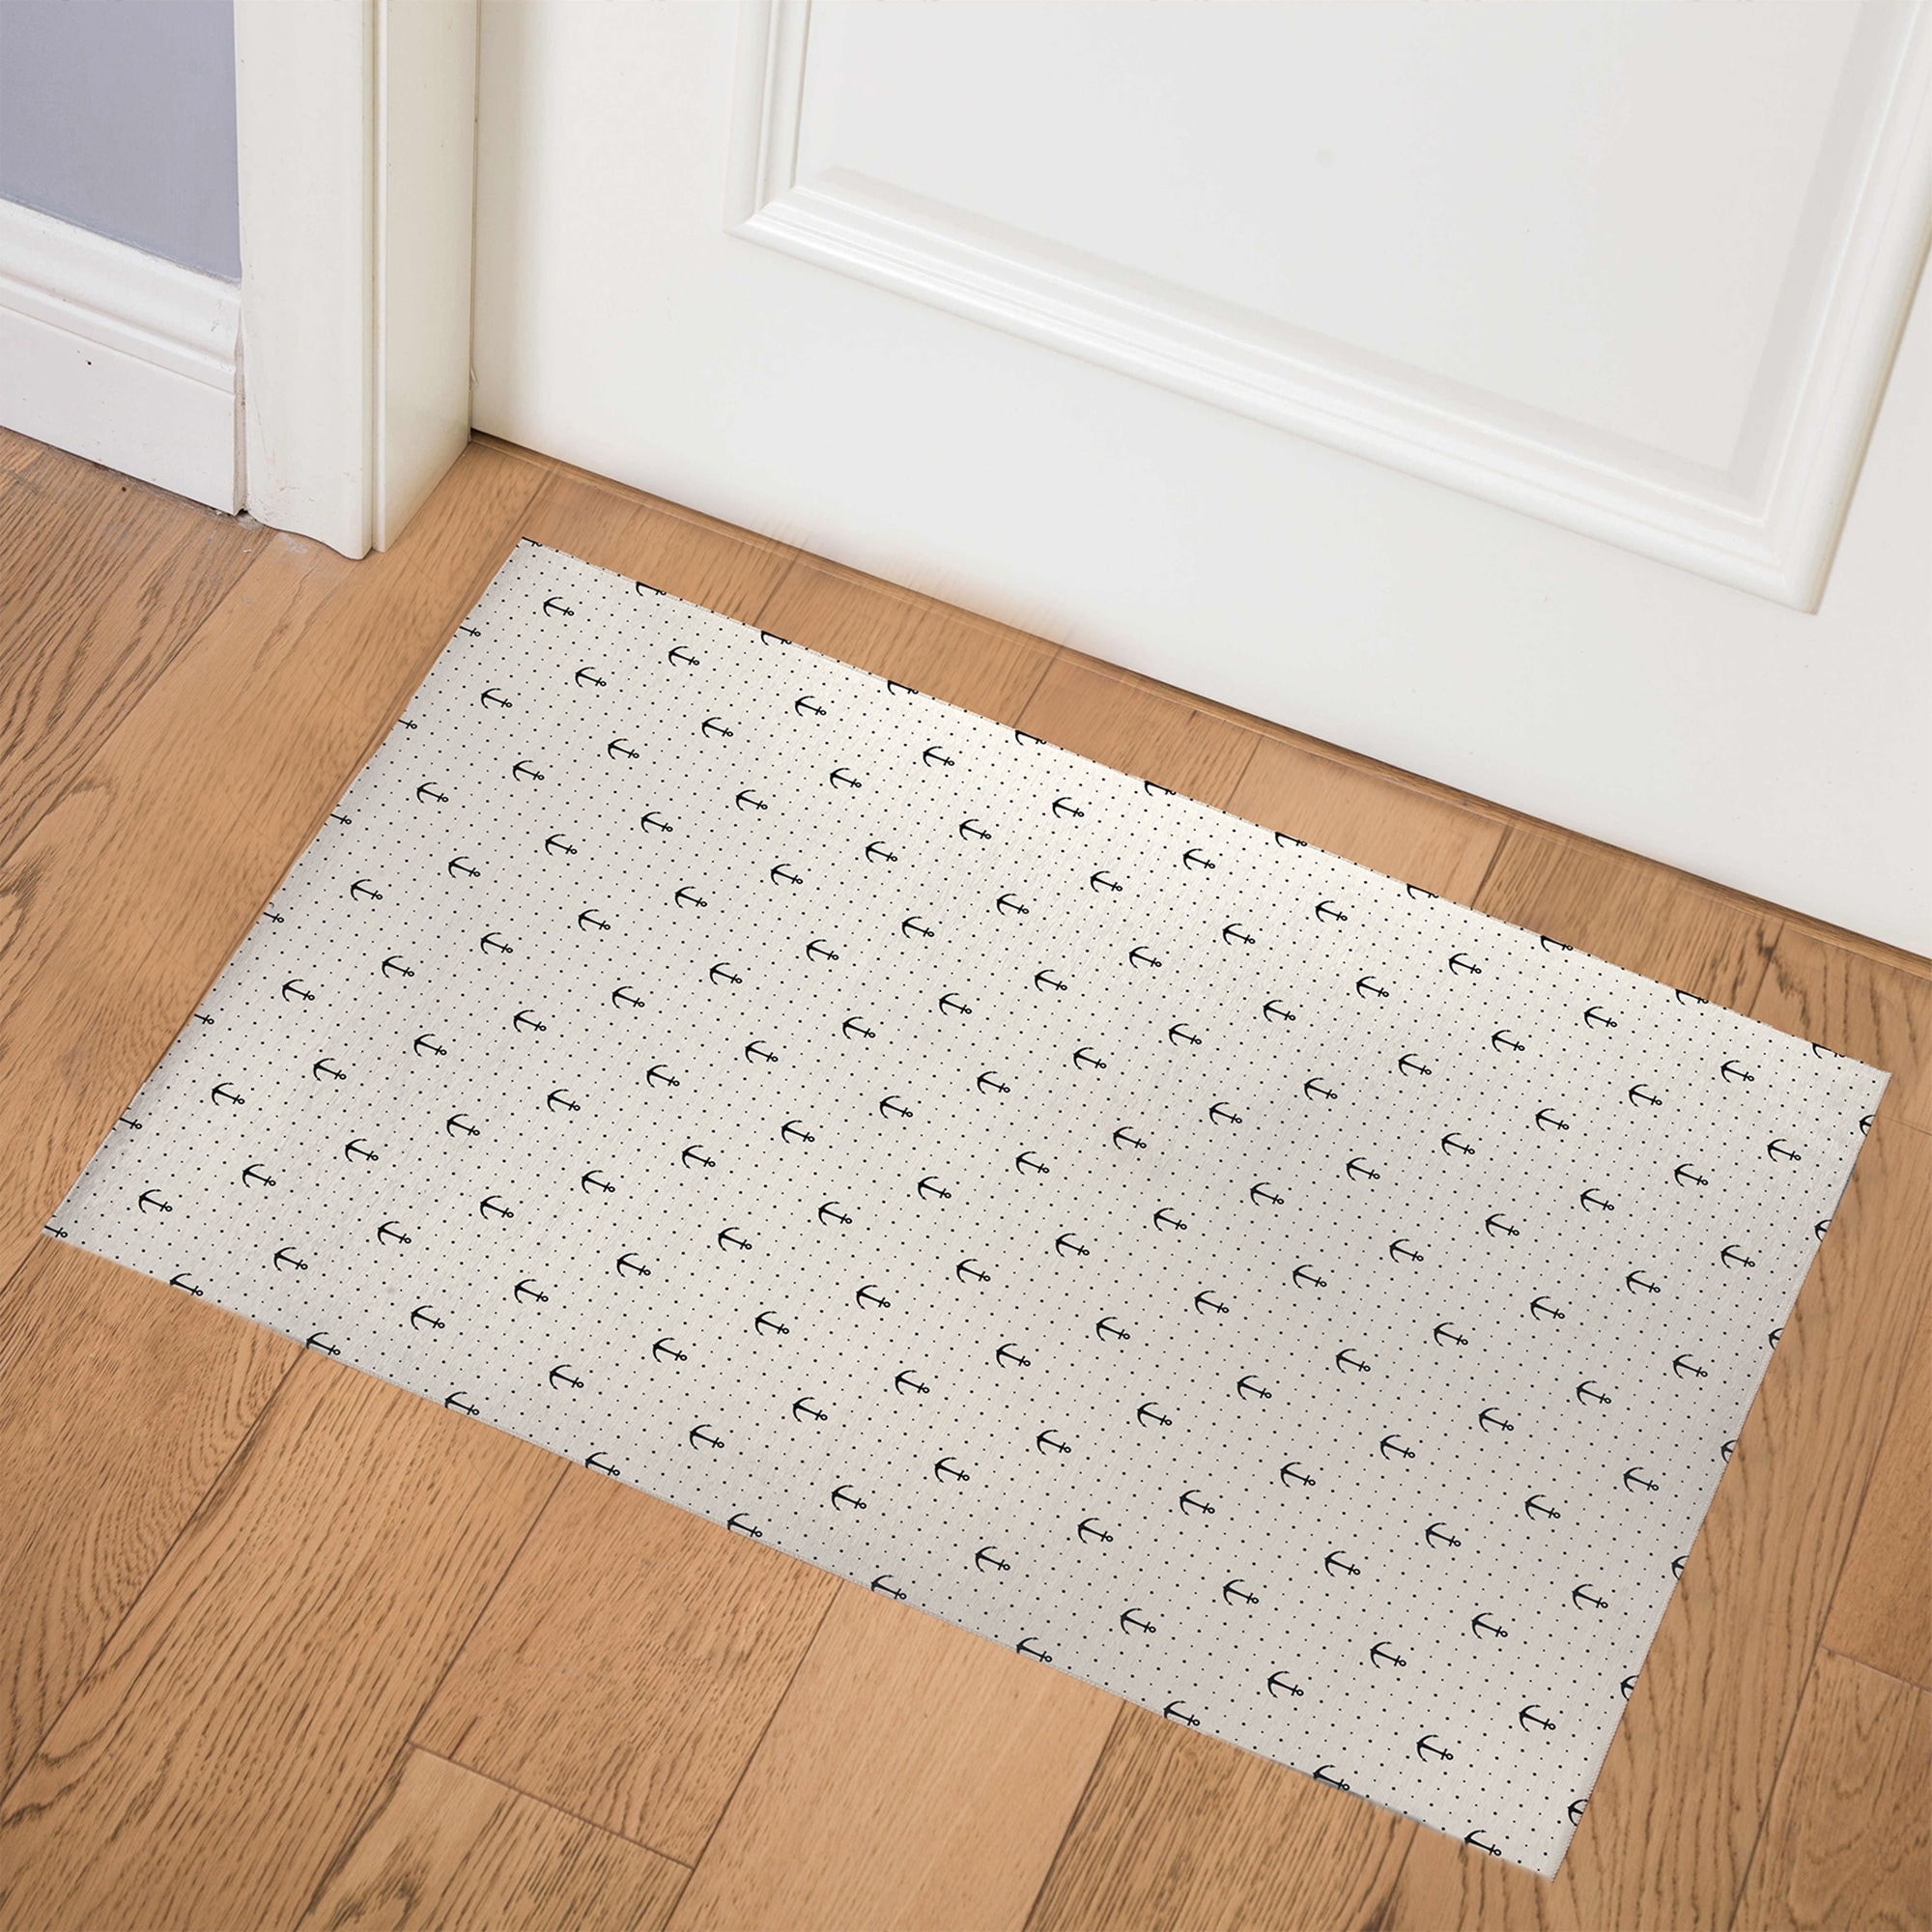 ANCHORS PARADISE Indoor Floor Mat By Kavka Designs - Bed Bath & Beyond -  31257895